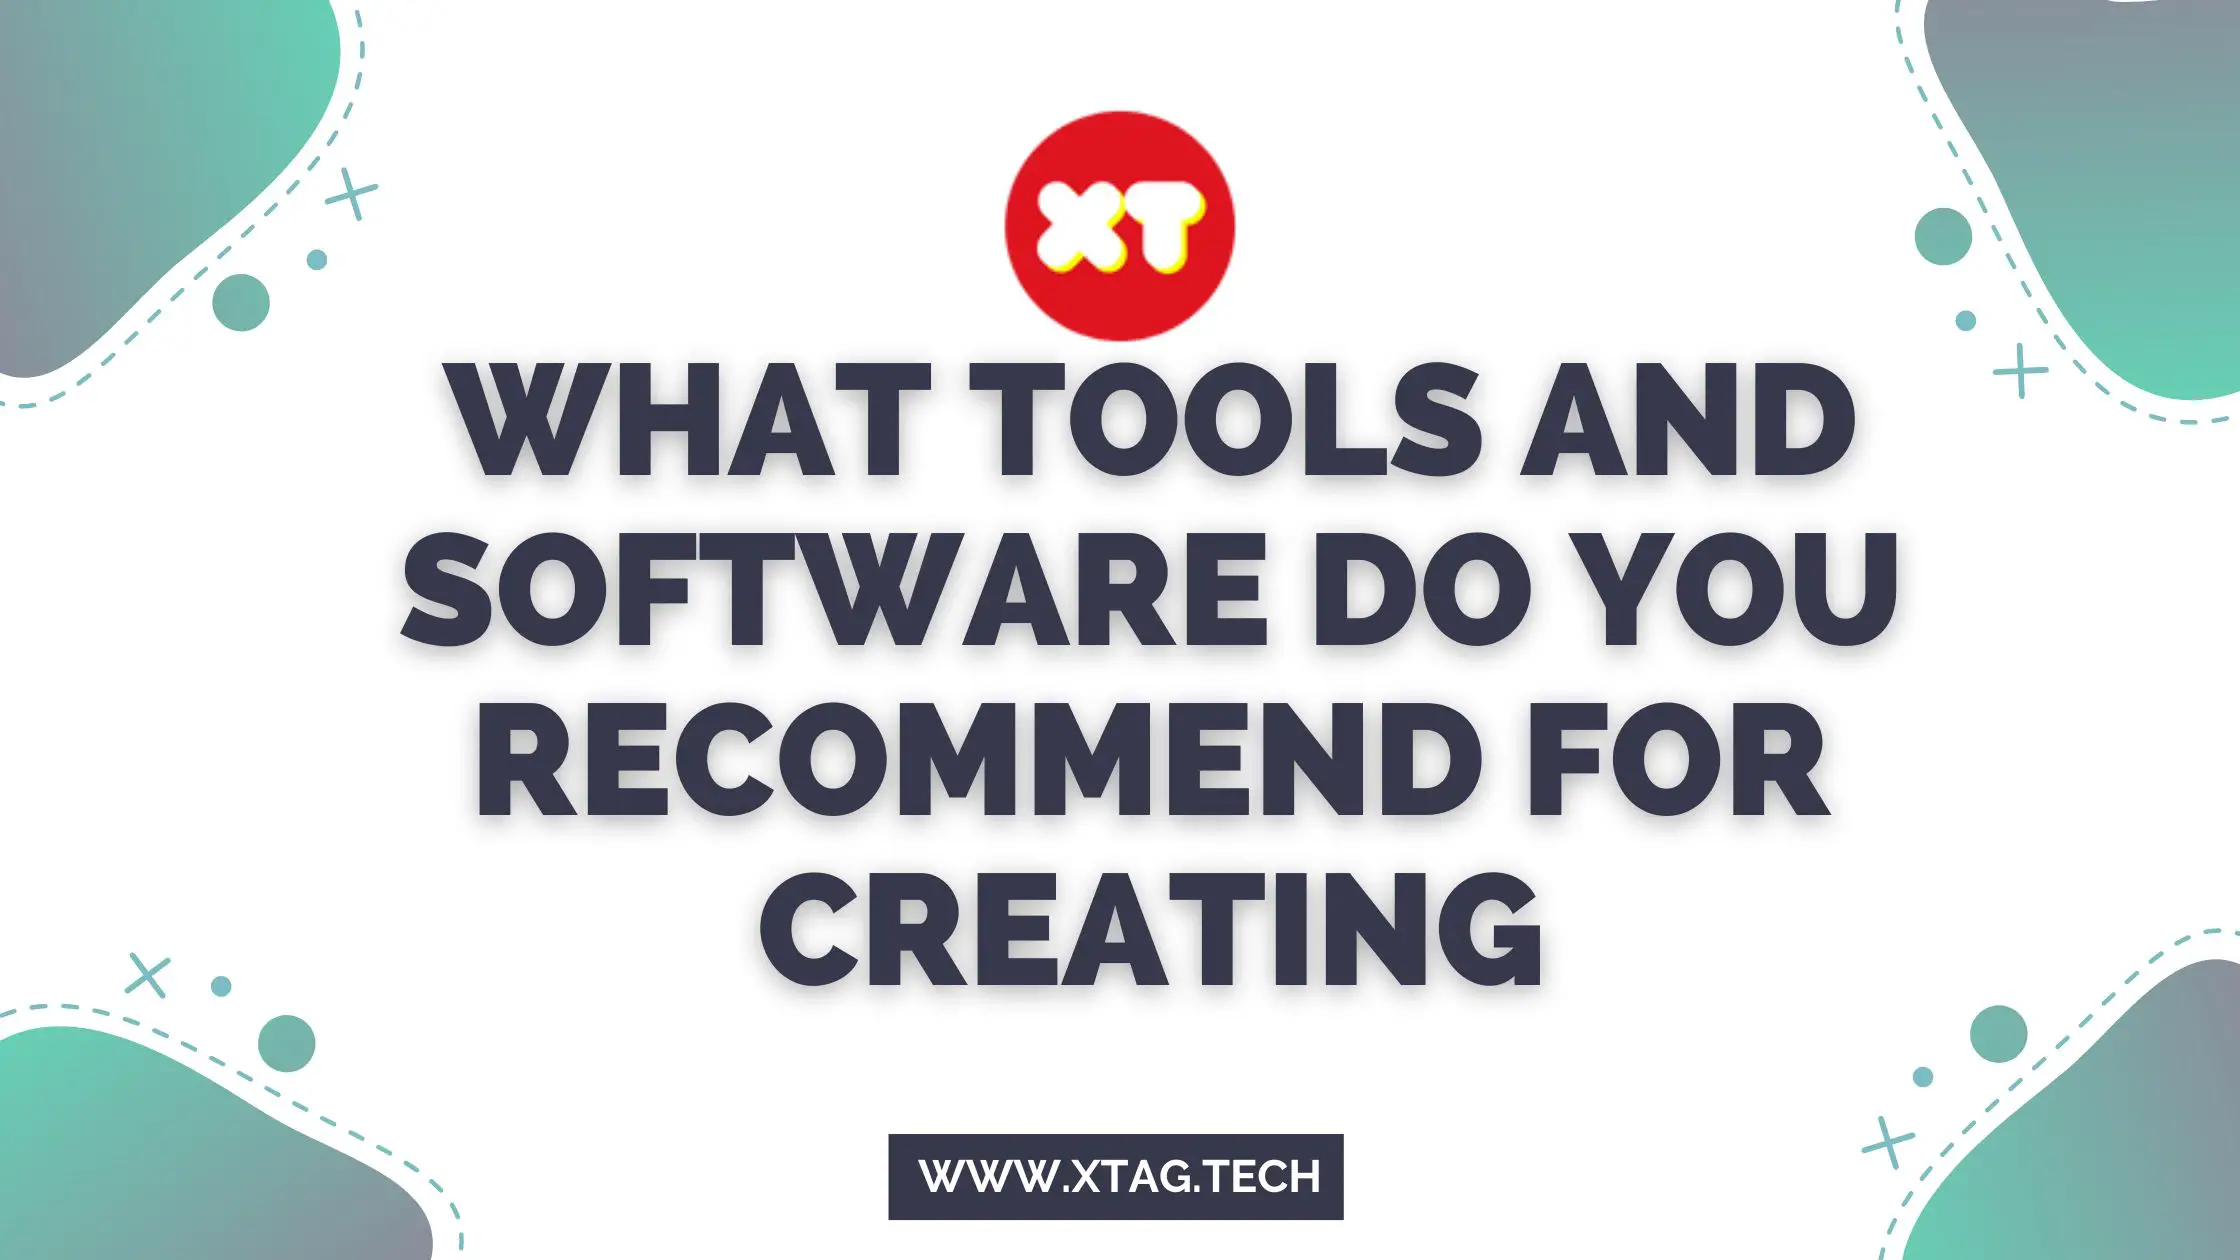 What Tools And Software Do You Recommend For Creating High-Quality Designs That Meet Platform Specifications?